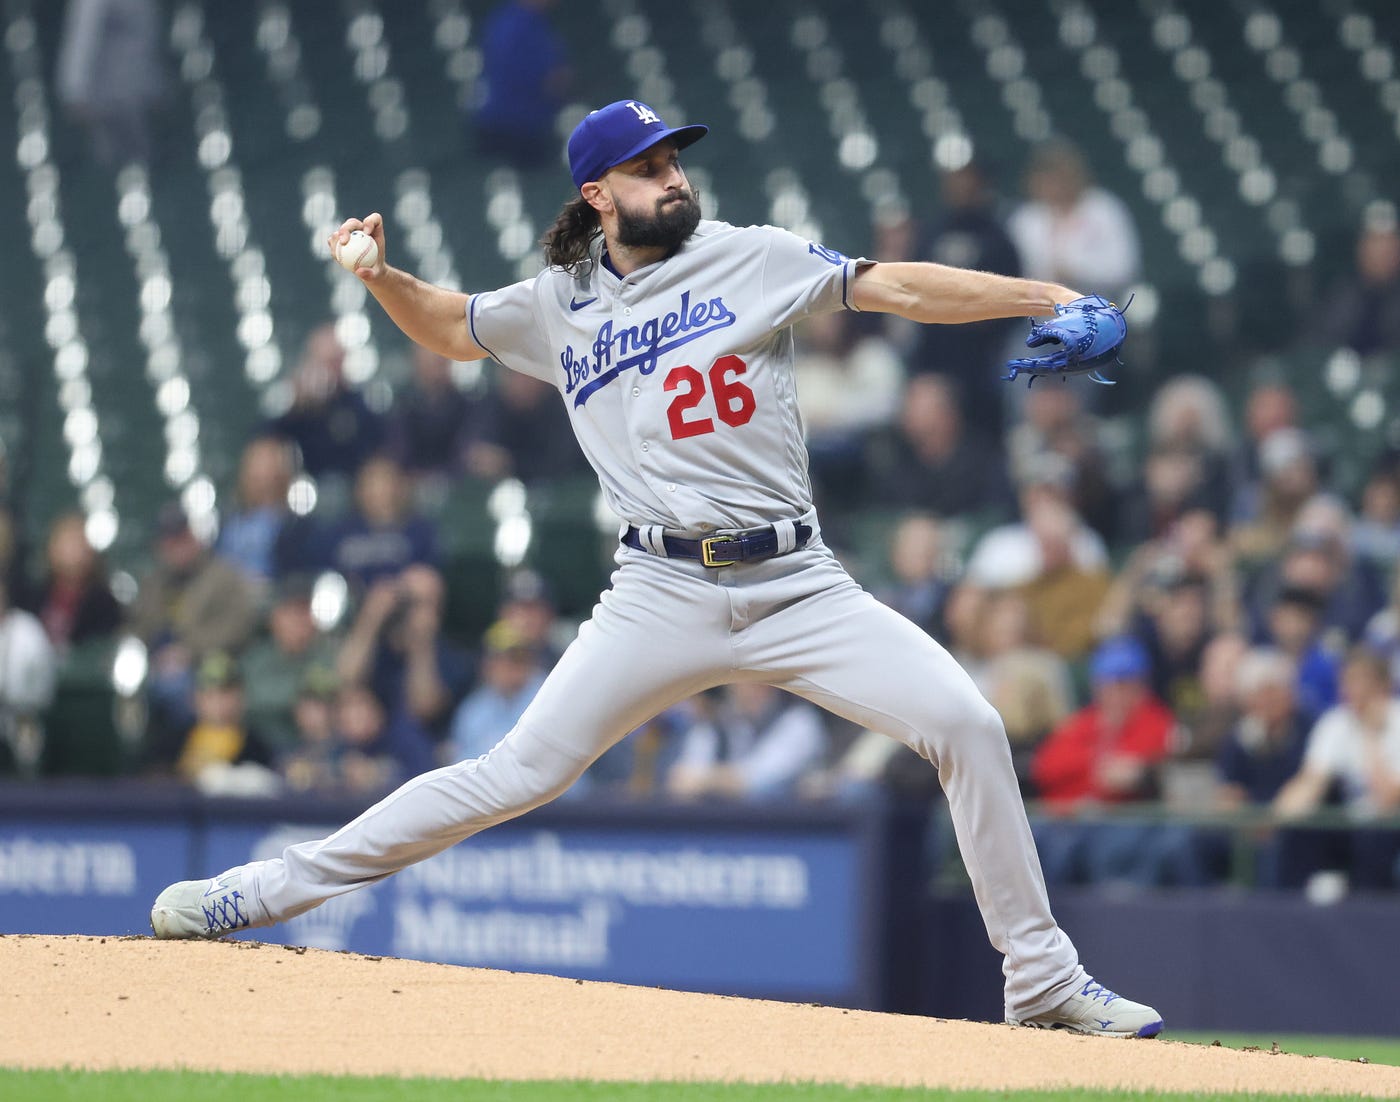 Gonsolin and the Dodgers get the L, but the right-hander saw a return to  form, by Cary Osborne